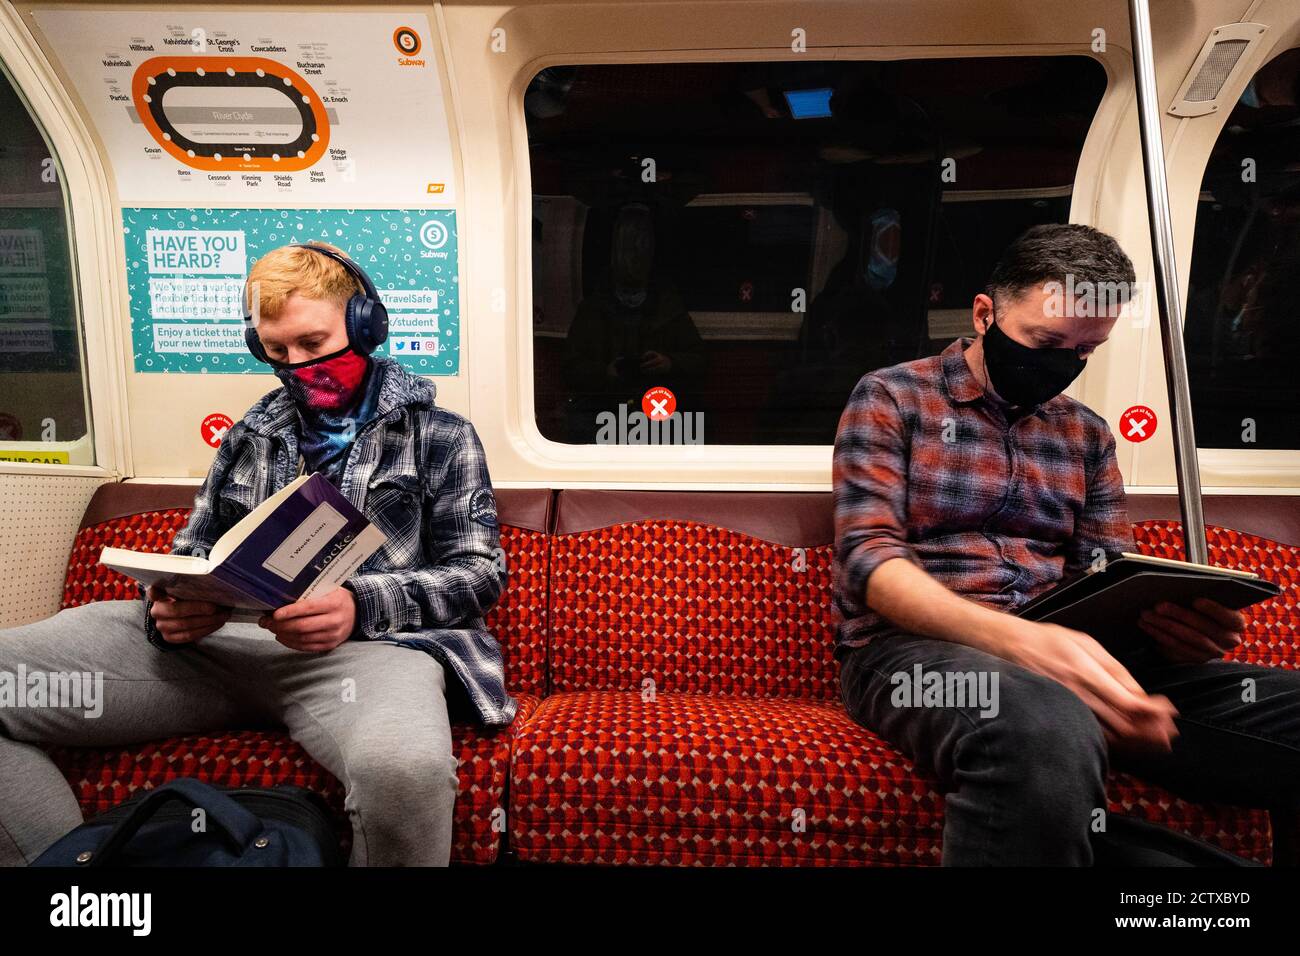 Glasgow, Scotland, UK. 25 September, 2020. As the threat of a second wave of Covid-19 cases increases , members of the public go about their business in Glasgow city centre today.  Pictured;  Two men reading at a social distance on the Glasgow subway system. Iain Masterton/Alamy Live News Stock Photo